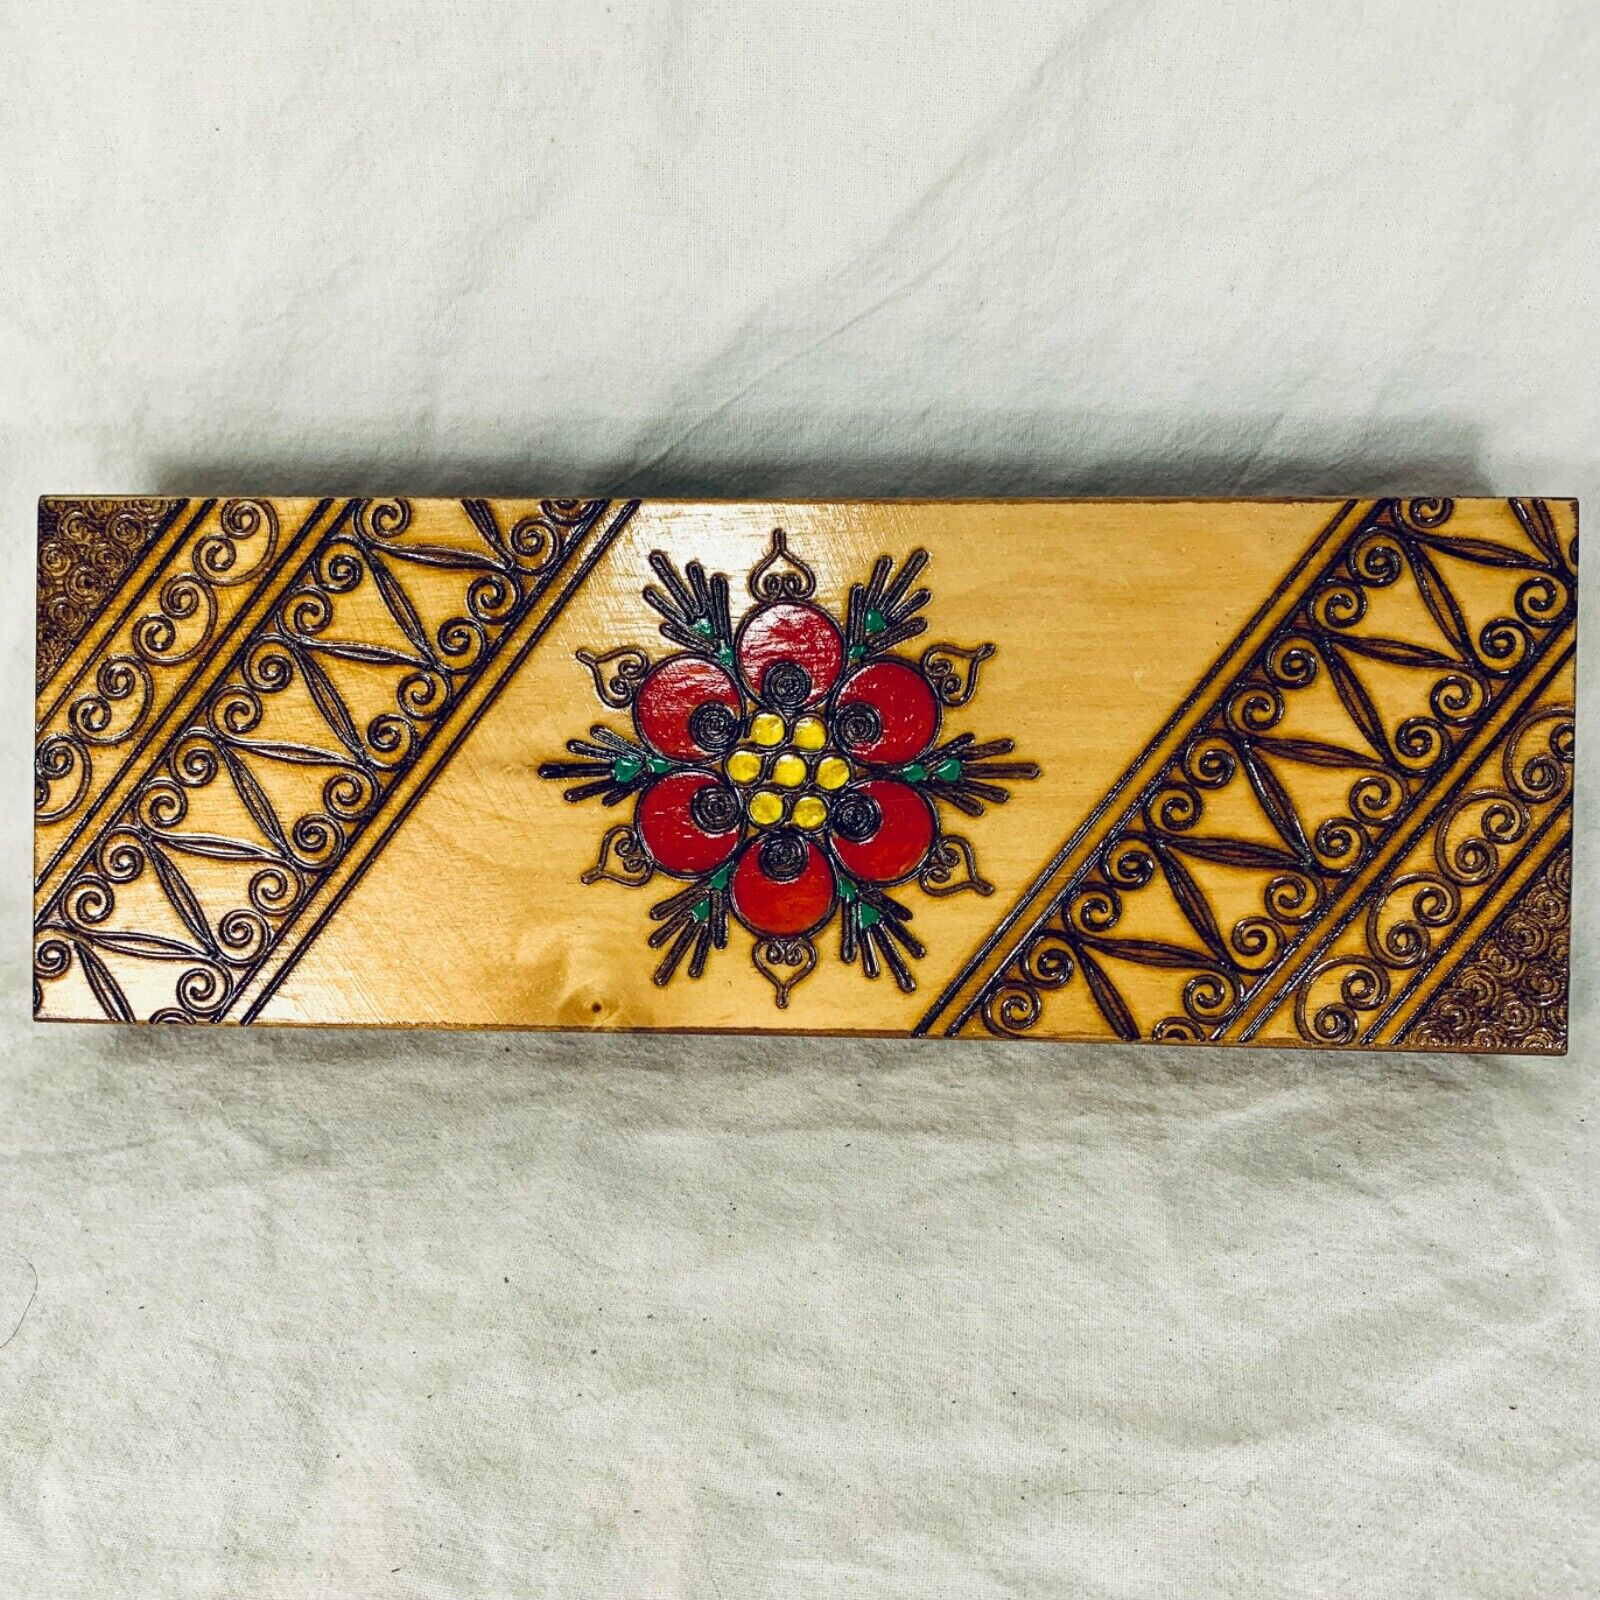 Vintage Russian Pyrography Painted Burned Wood Trinket Box Flower 21x8cm